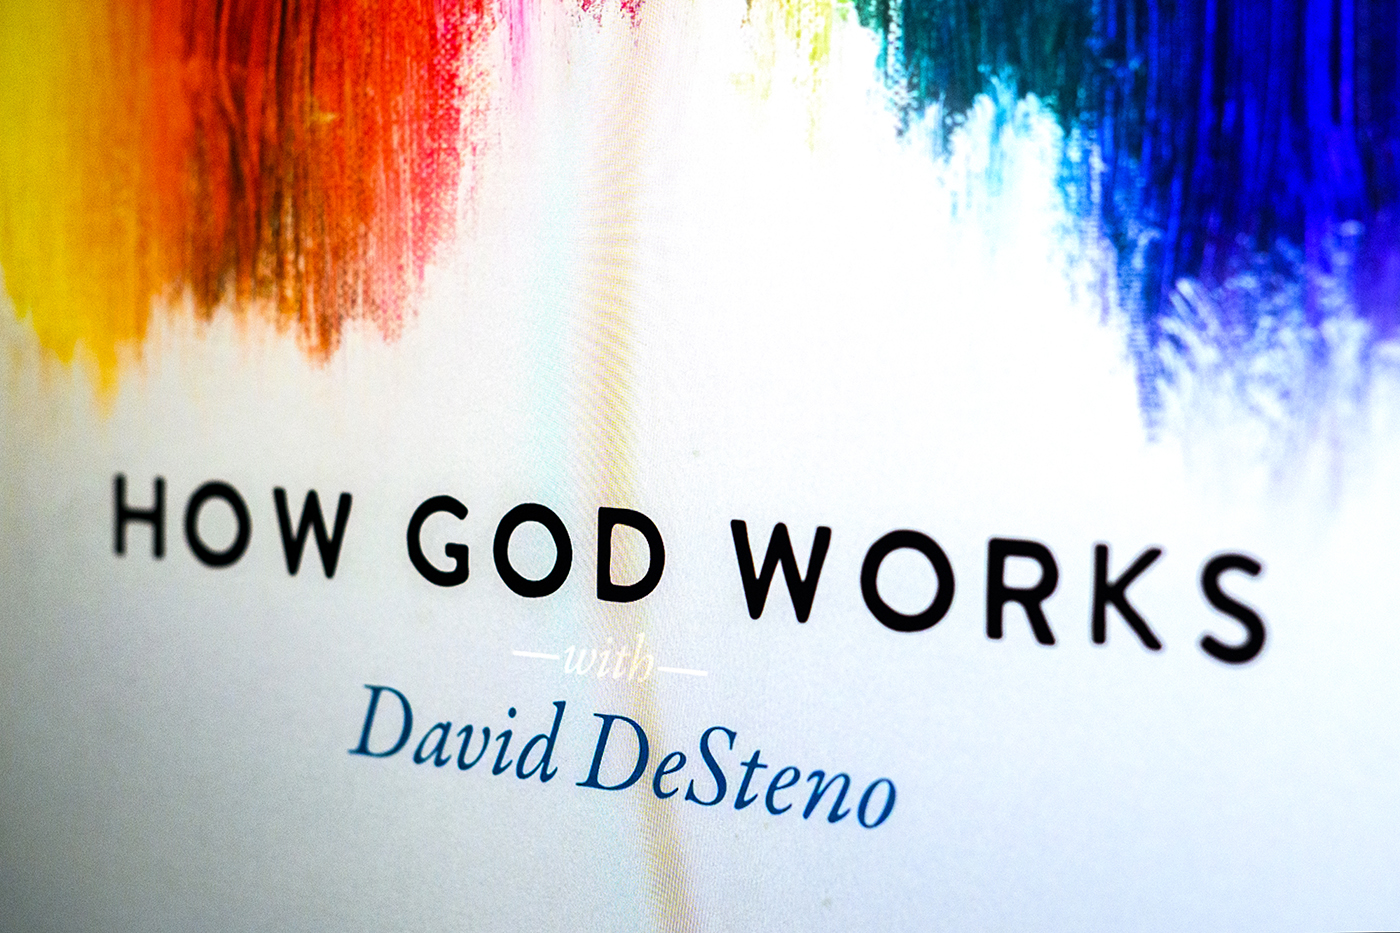 A logo that says "How God Works" with "David DeSteno" written below.